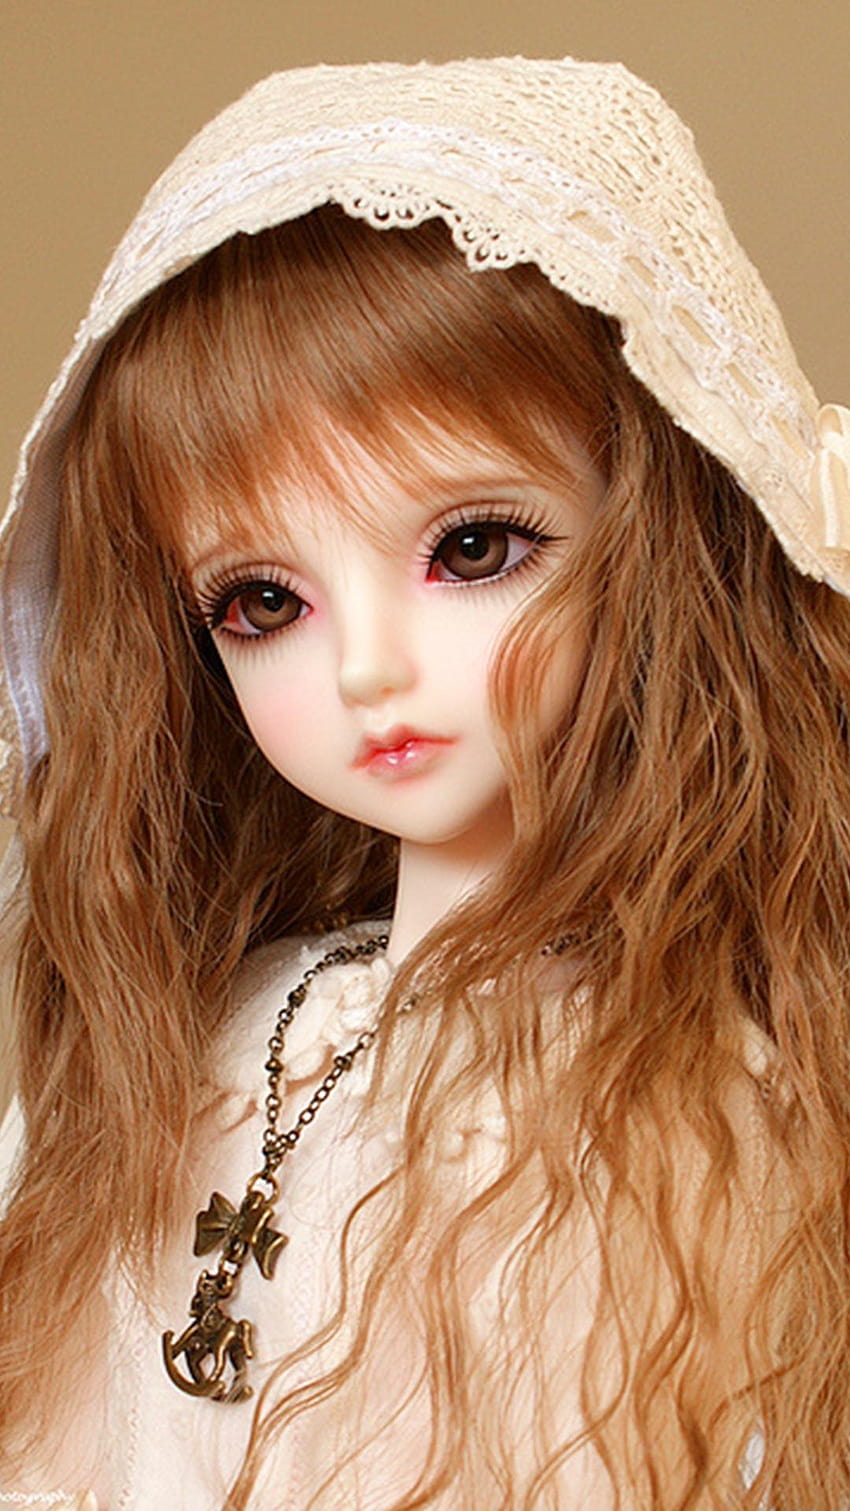 Fluorescent Pink Cute Doll Live, cute and beautiful baby doll ...